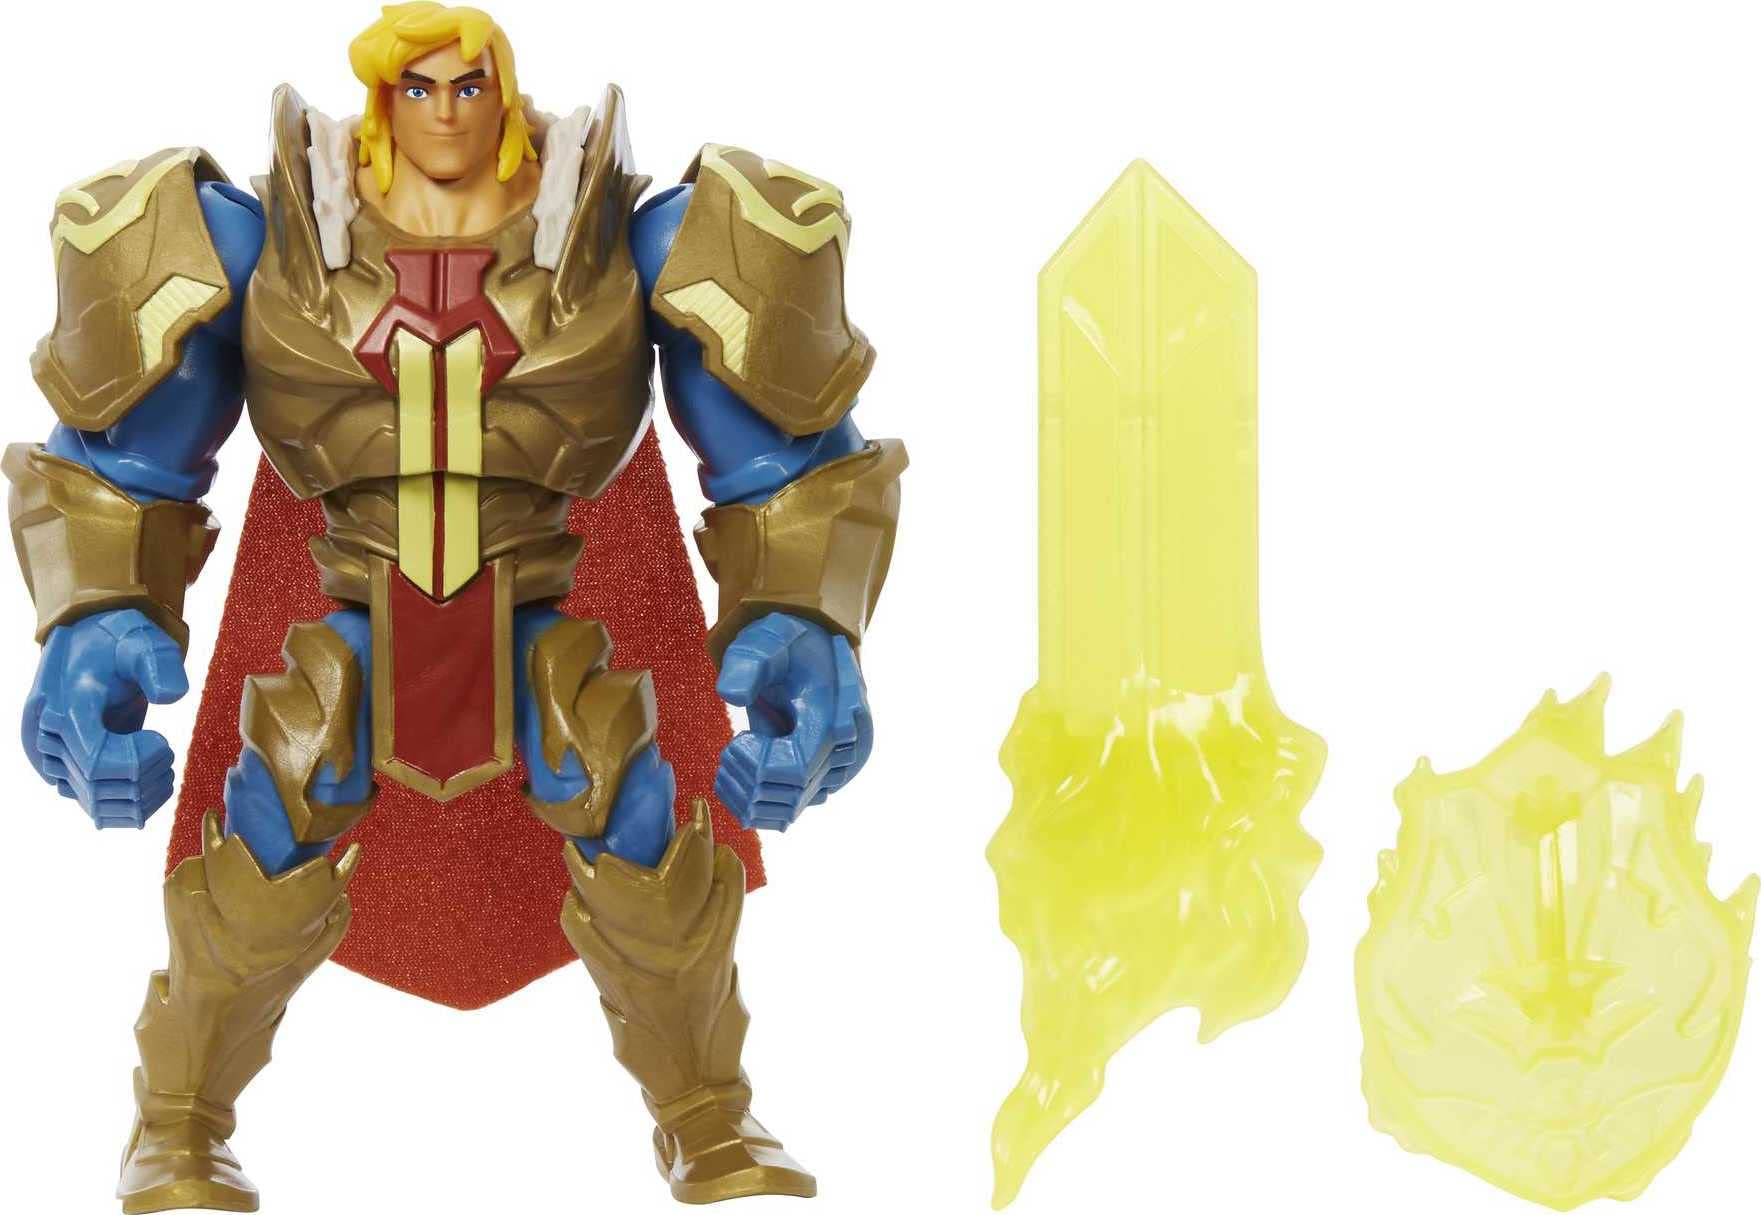 He-Man and the Masters of the Universe He-Man Action Figure in Grayskull Armor with Power Attack Move & 2 Accessories Inspired by MOTU Netflix Animated Series, 5.5-in Collectible Toy for Kids Ages 4+